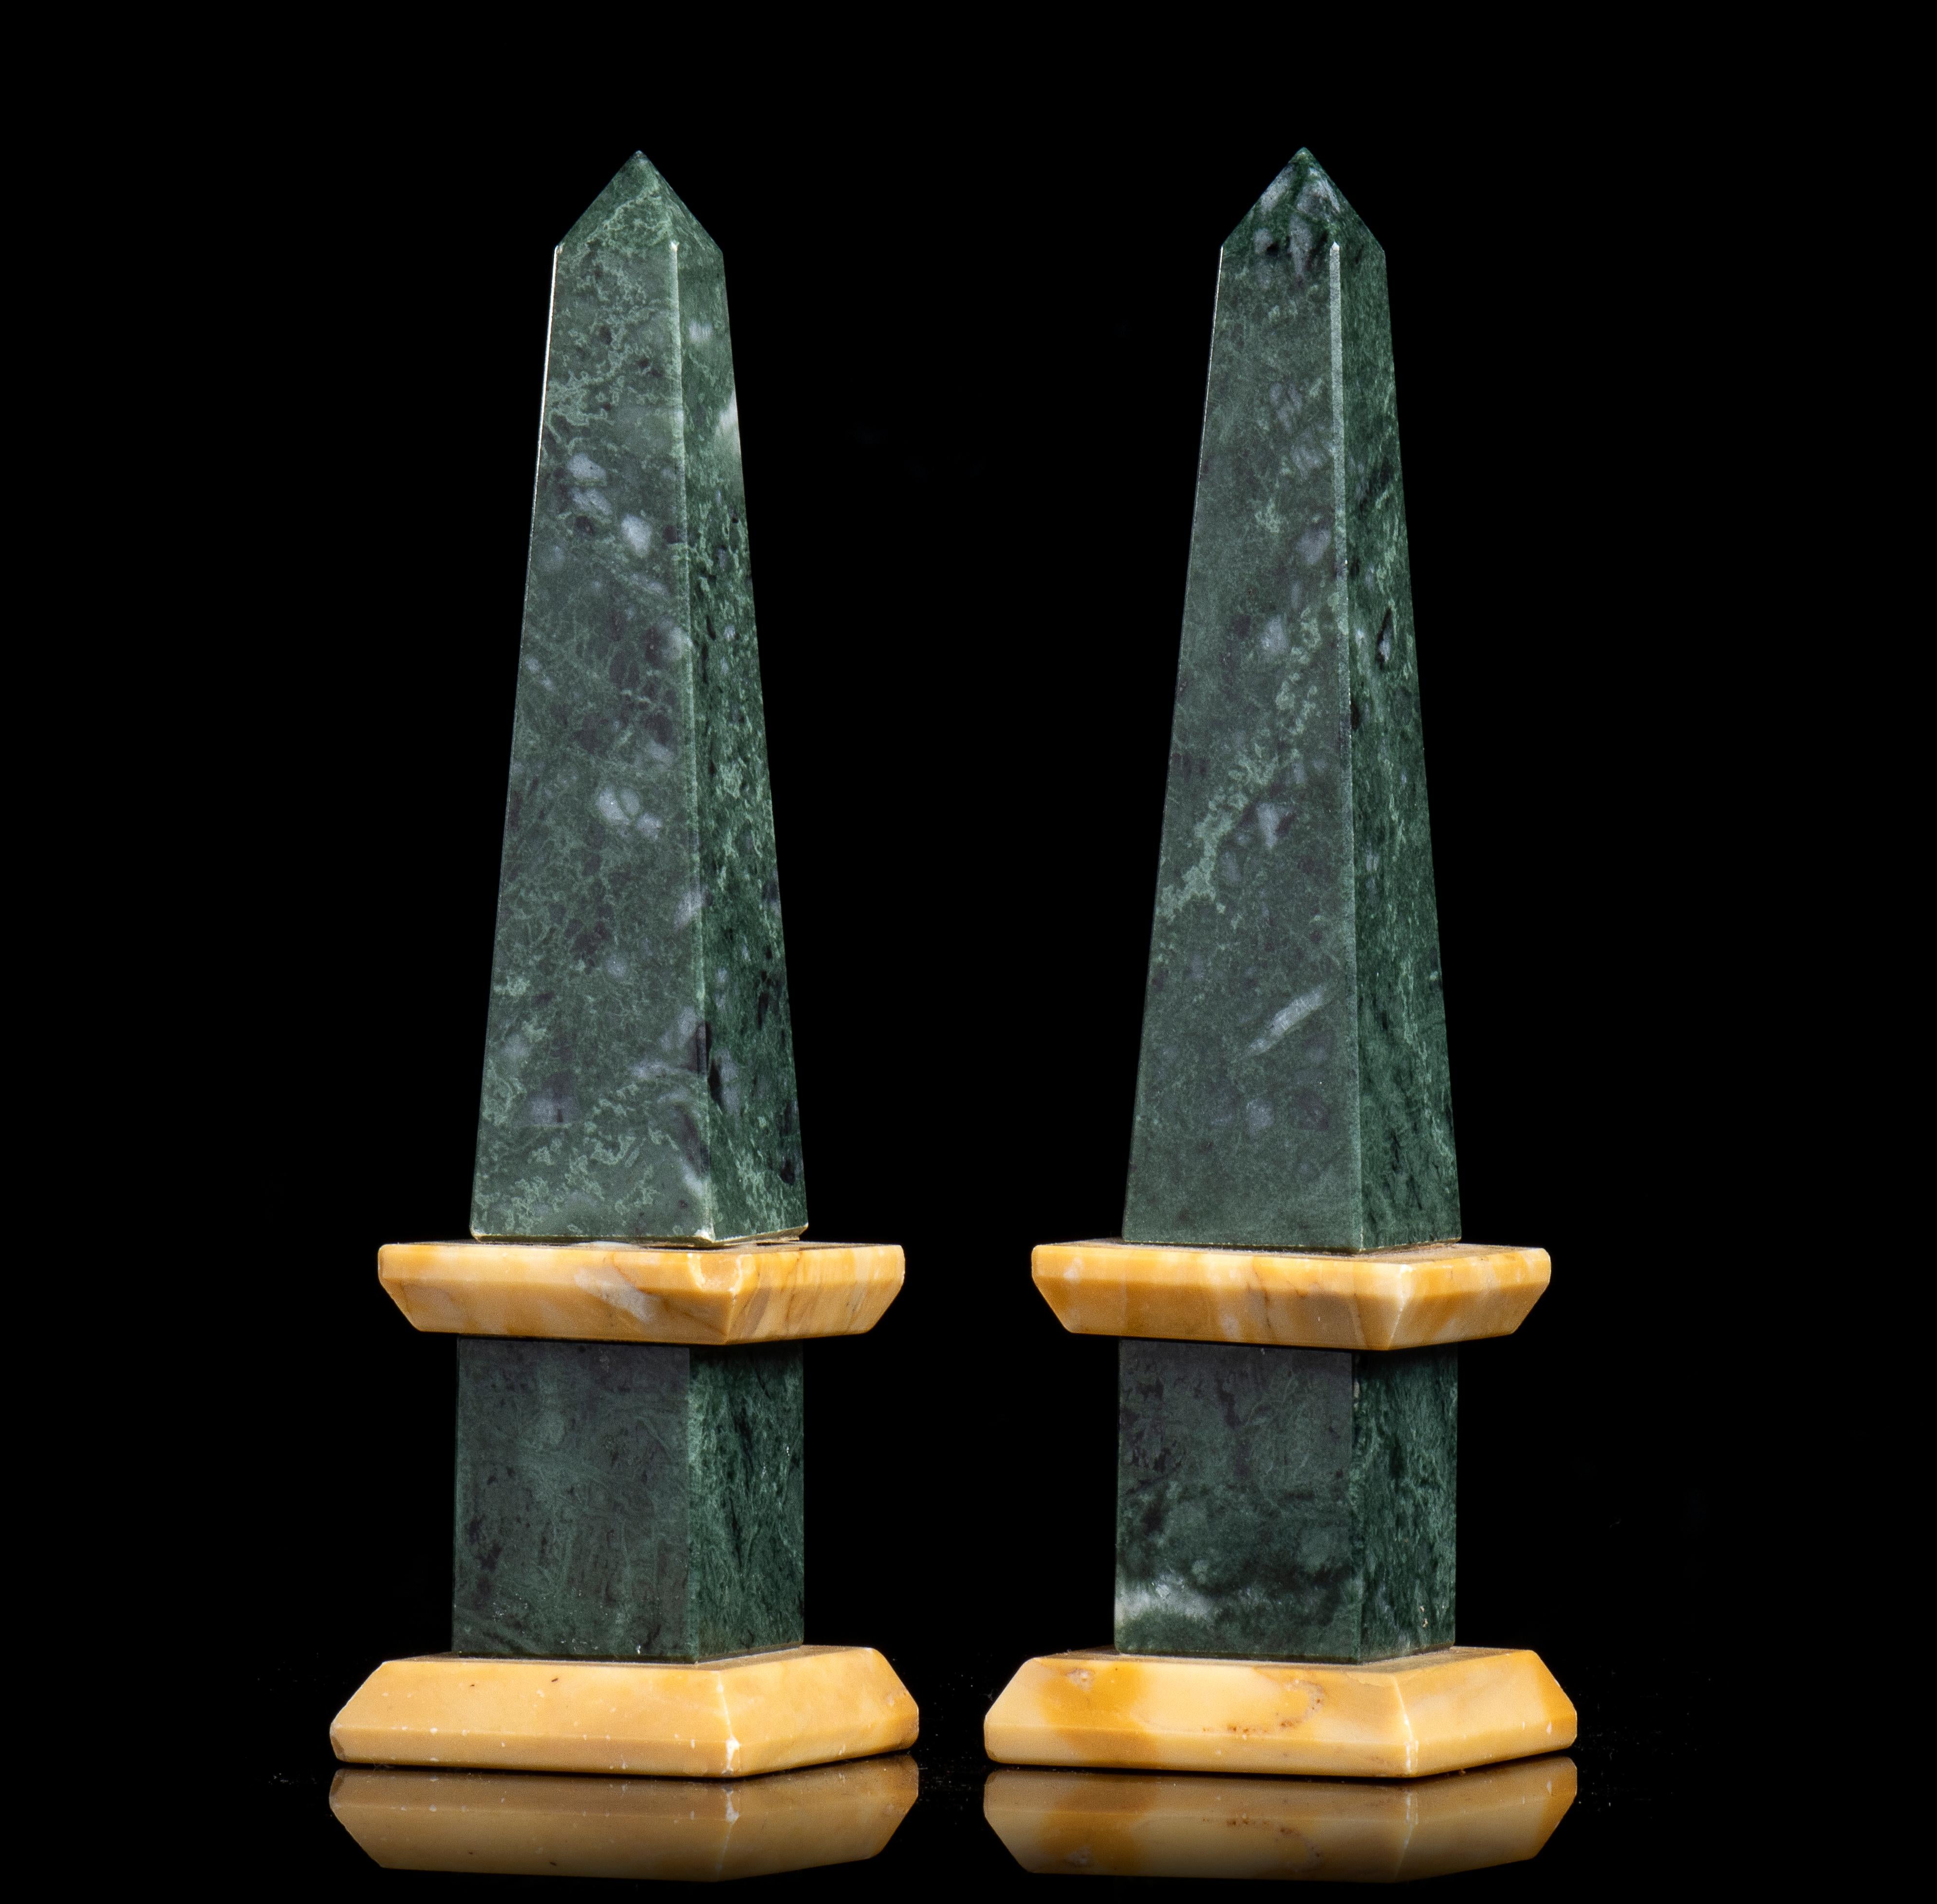 an elegant pair of grand tour sculptured obelisks, carved in a warm and elegant green marble with two squared three orders bases carved in a Siena Yelllow Marble. The two marble used are a classical example of elegance and traditionally used in